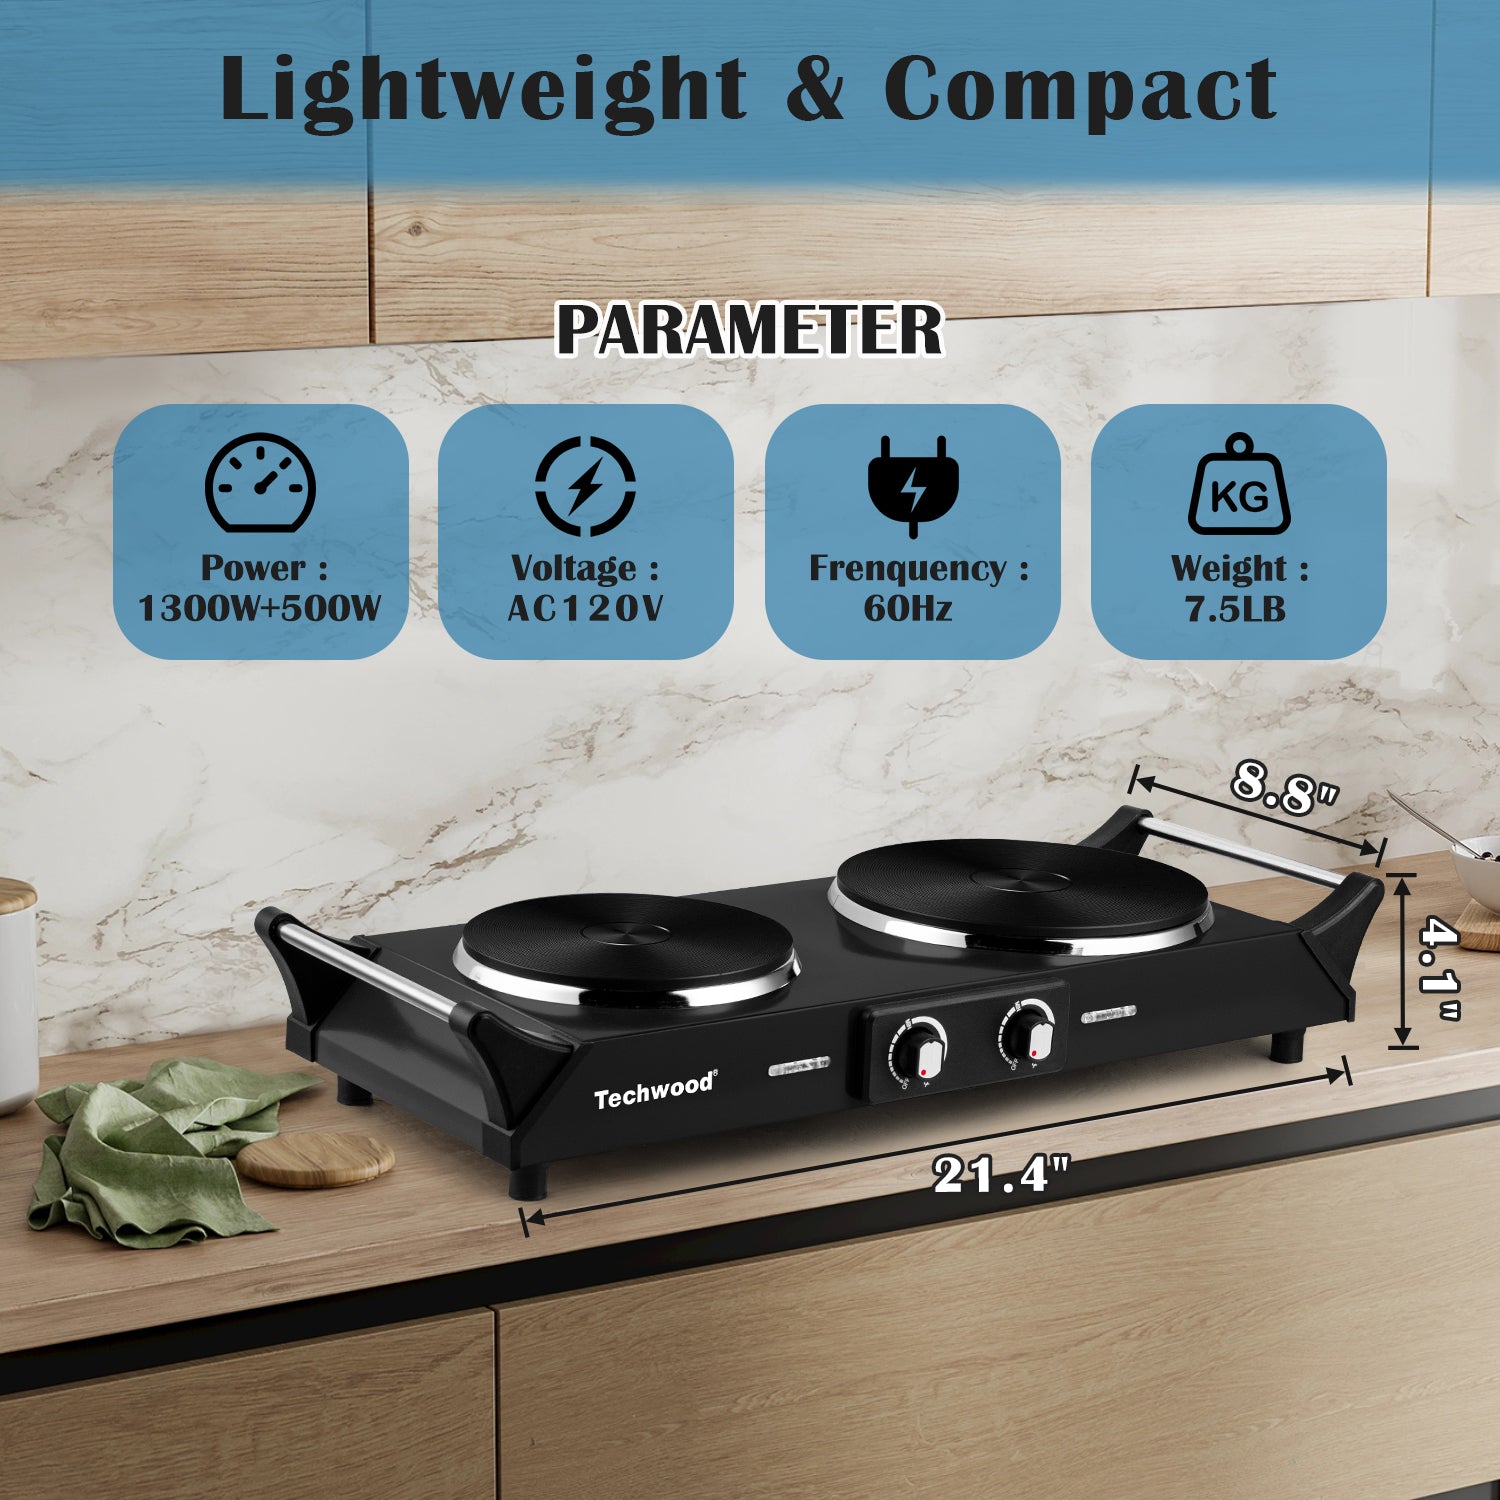 Techwood Hot Plate Electric Double Burner 1800W Portable Burner for Cooking with Adjustable Temperature & Stay Cool Handles, Non-Slip Rubber Feet